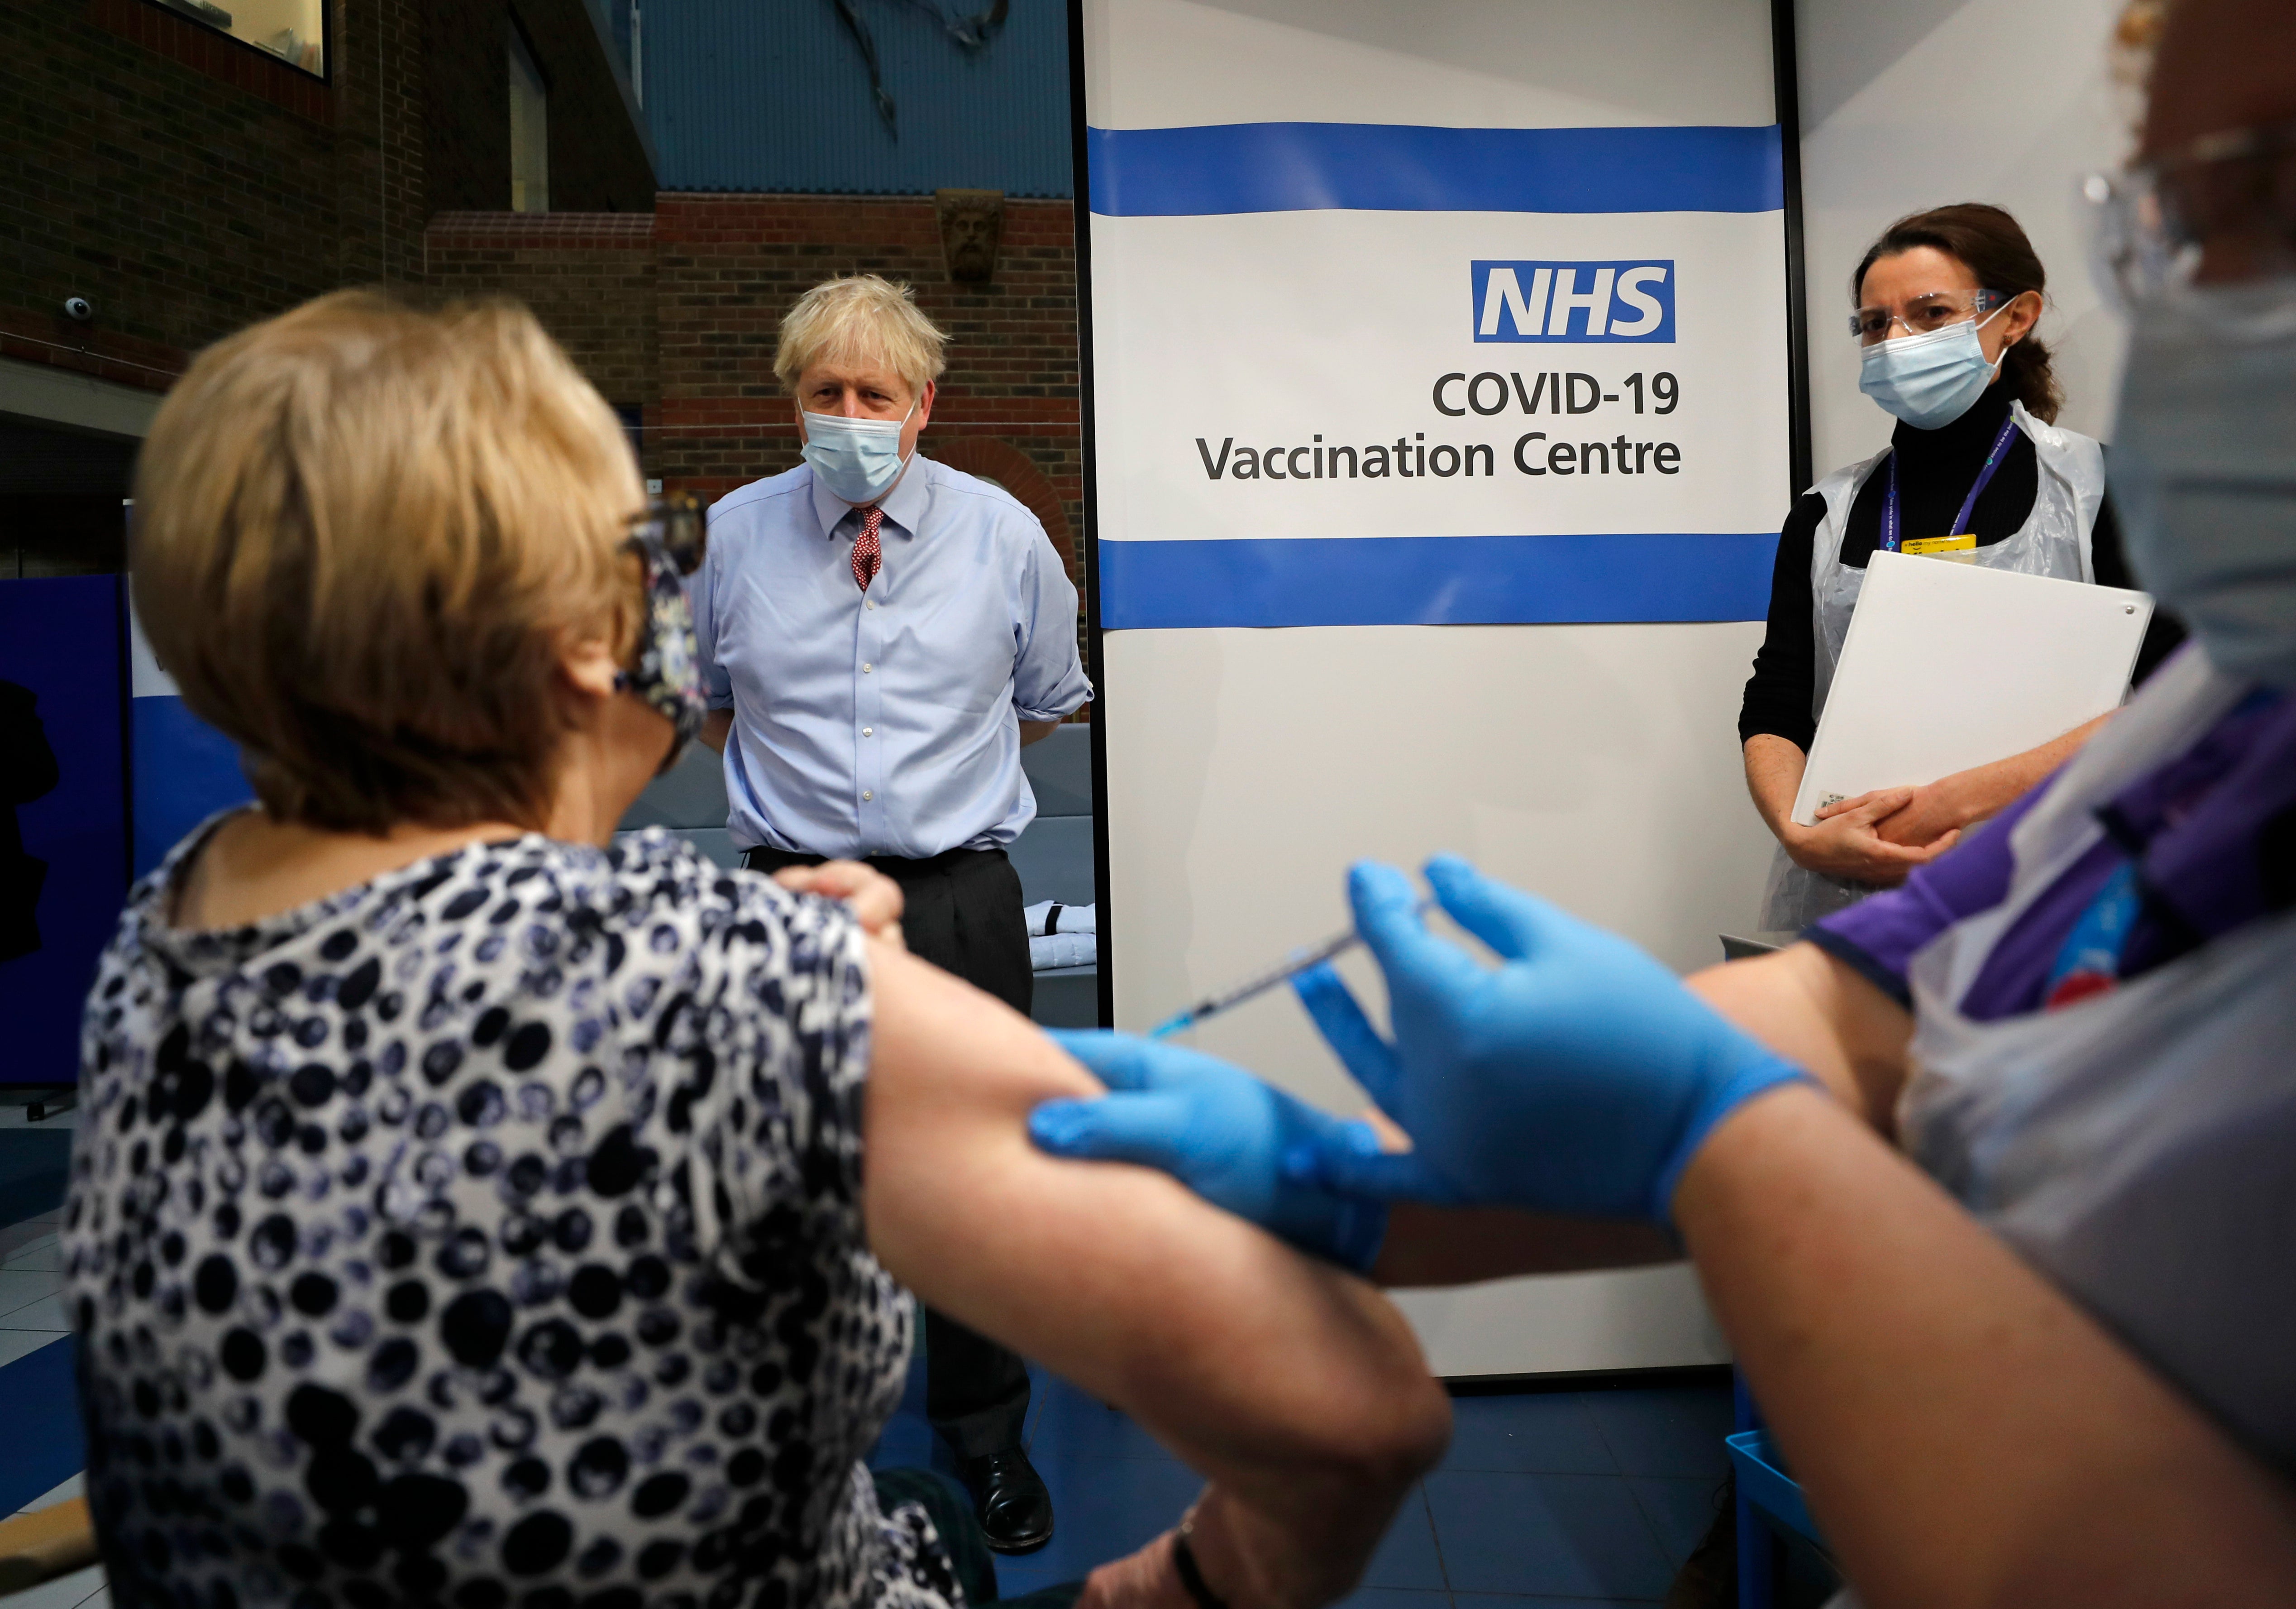 Boris Johnson was at Guy’s Hospital to see the vaccine be administered&nbsp;